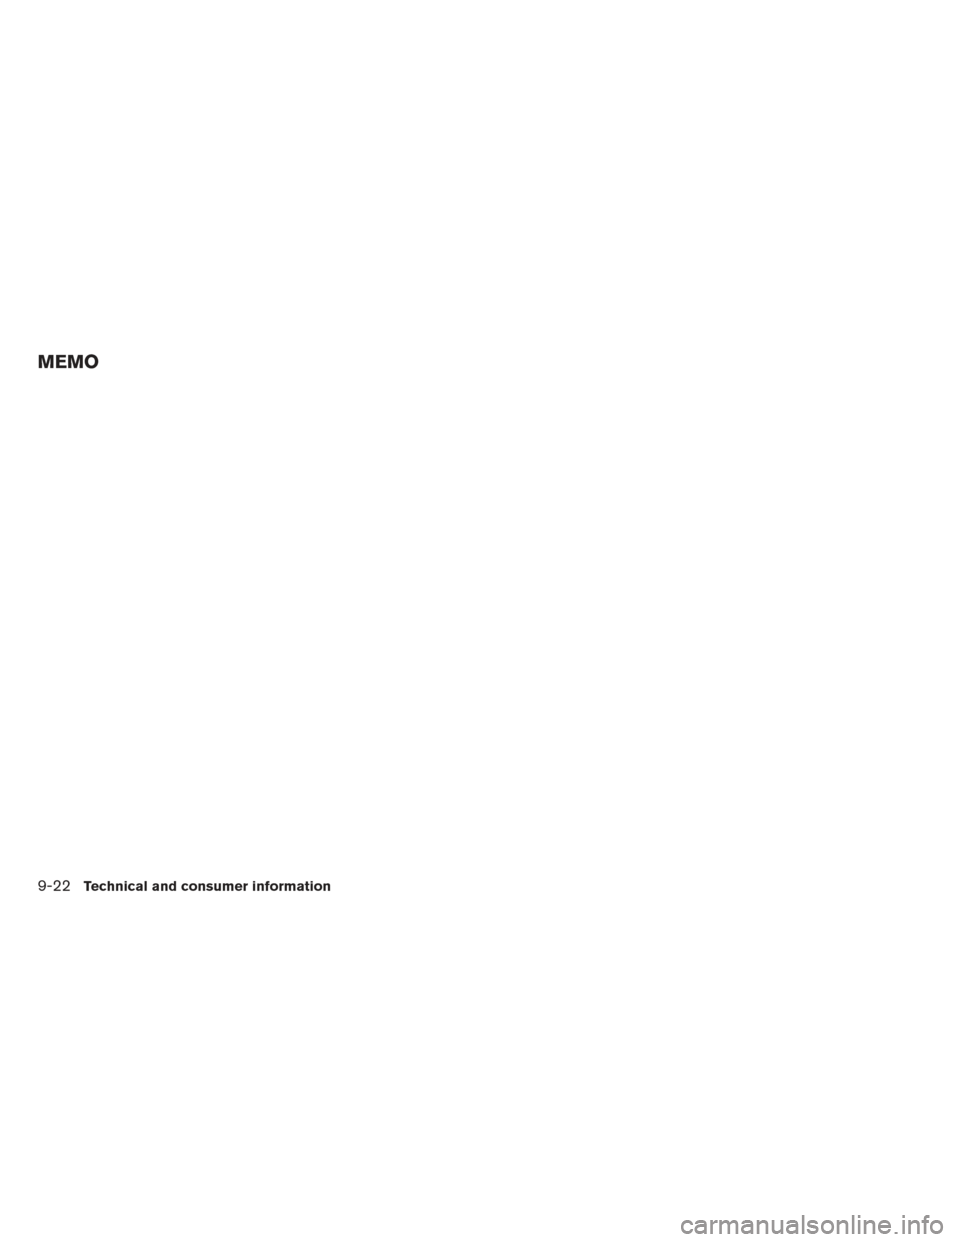 NISSAN ALTIMA 2013 L33 / 5.G Owners Manual MEMO
9-22Technical and consumer information 